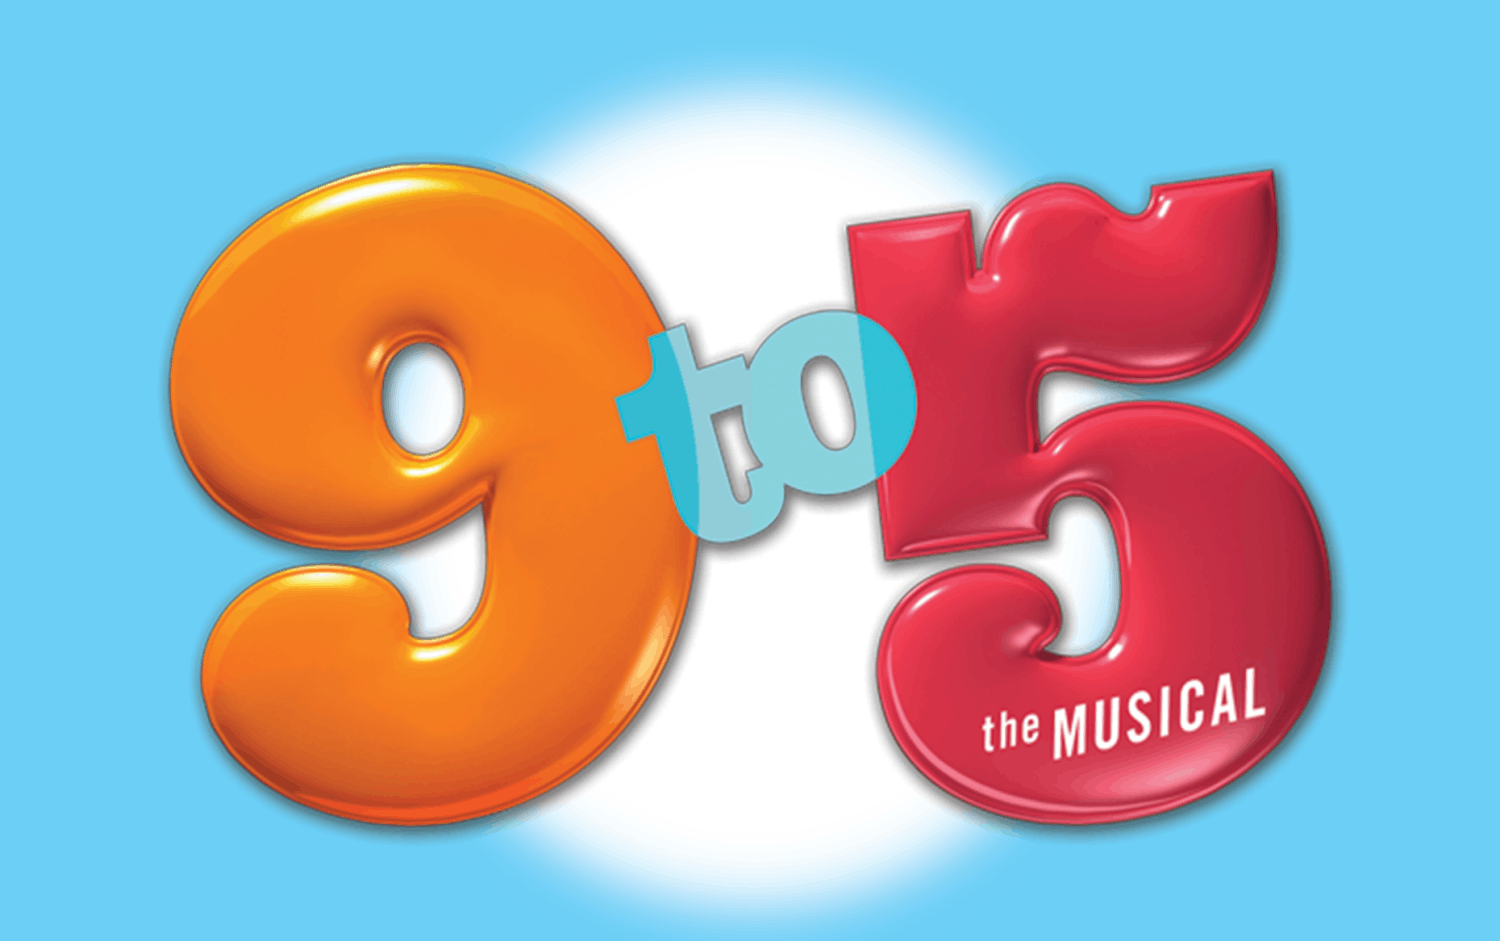 9 to 5 The Musical was shown at UB.